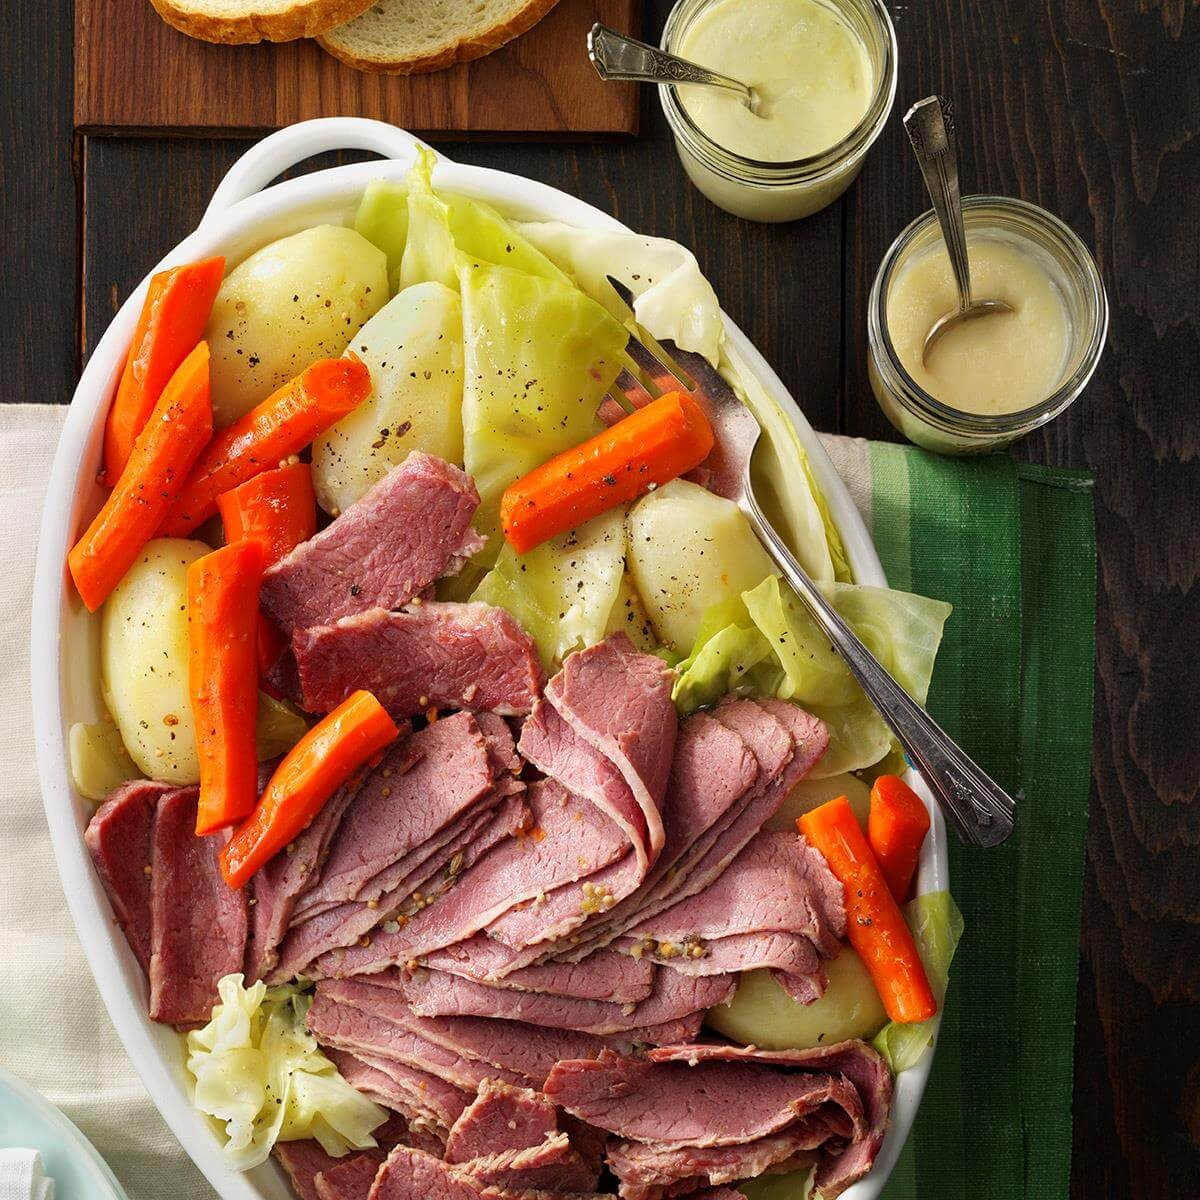 Best Corned Beef and Cabbage Recipe Fresh 22 Corned Beef and Cabbage Recipes to Make All Year